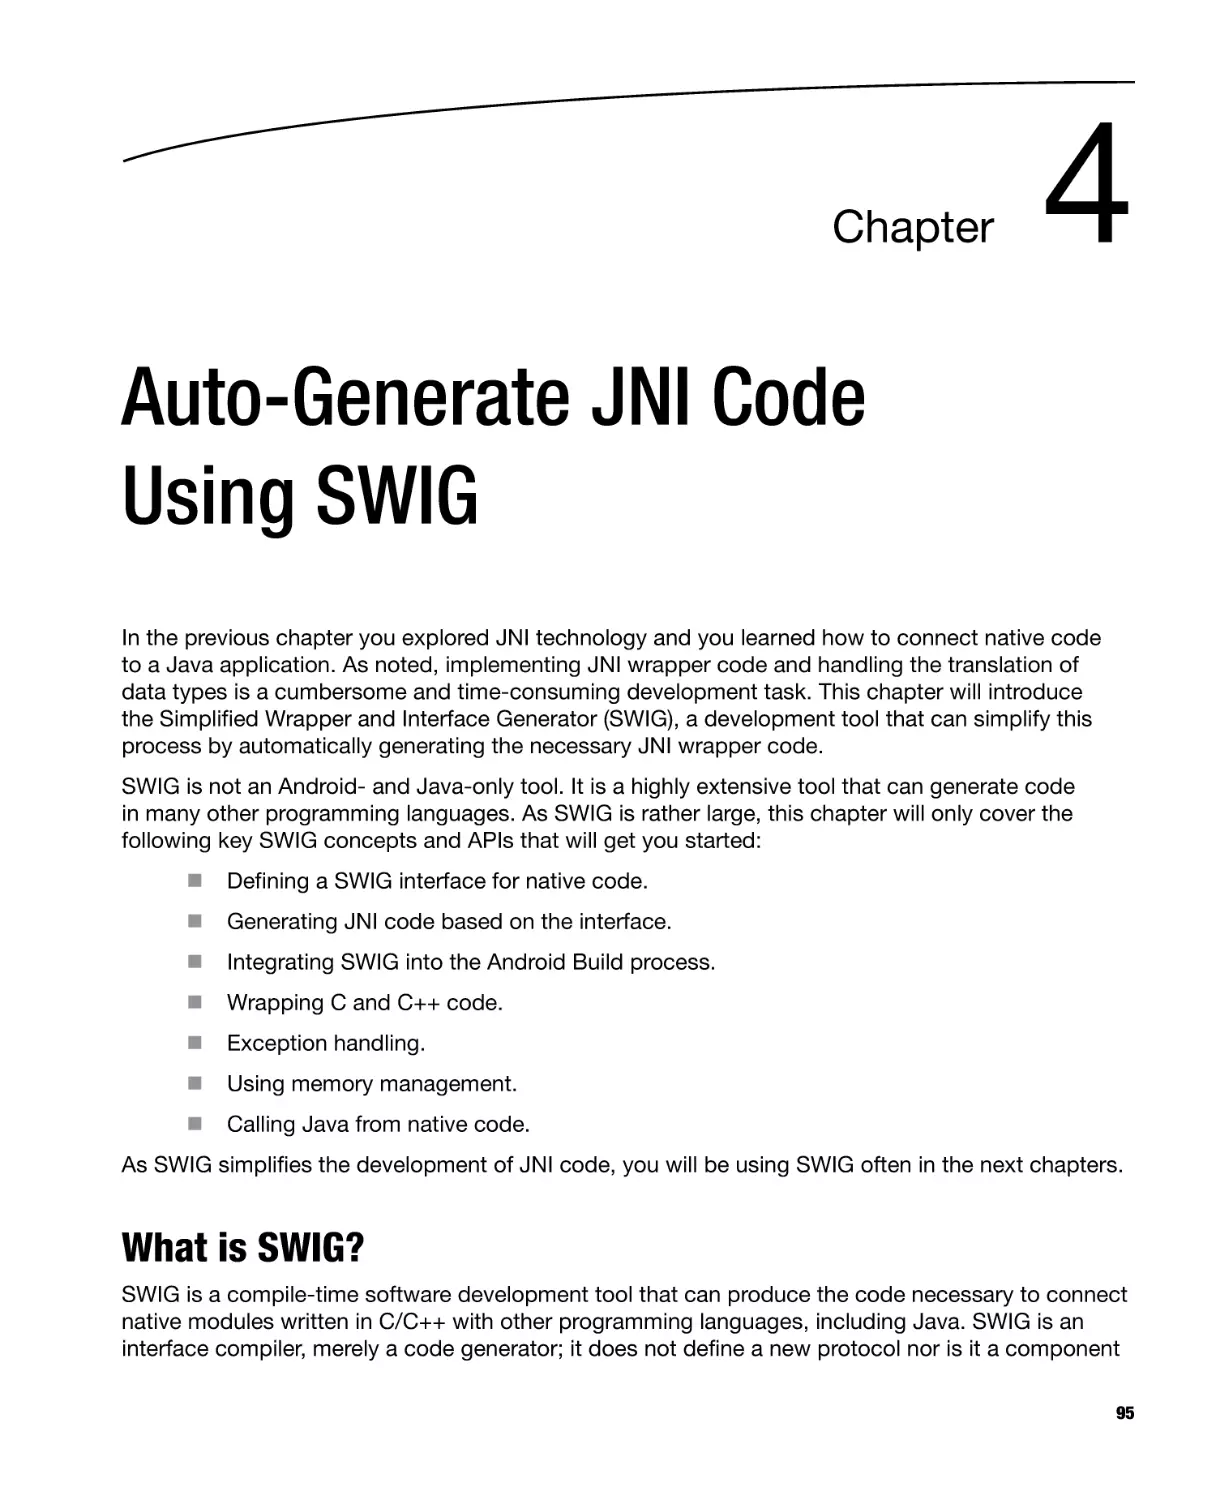 Chapter 4
What is SWIG?